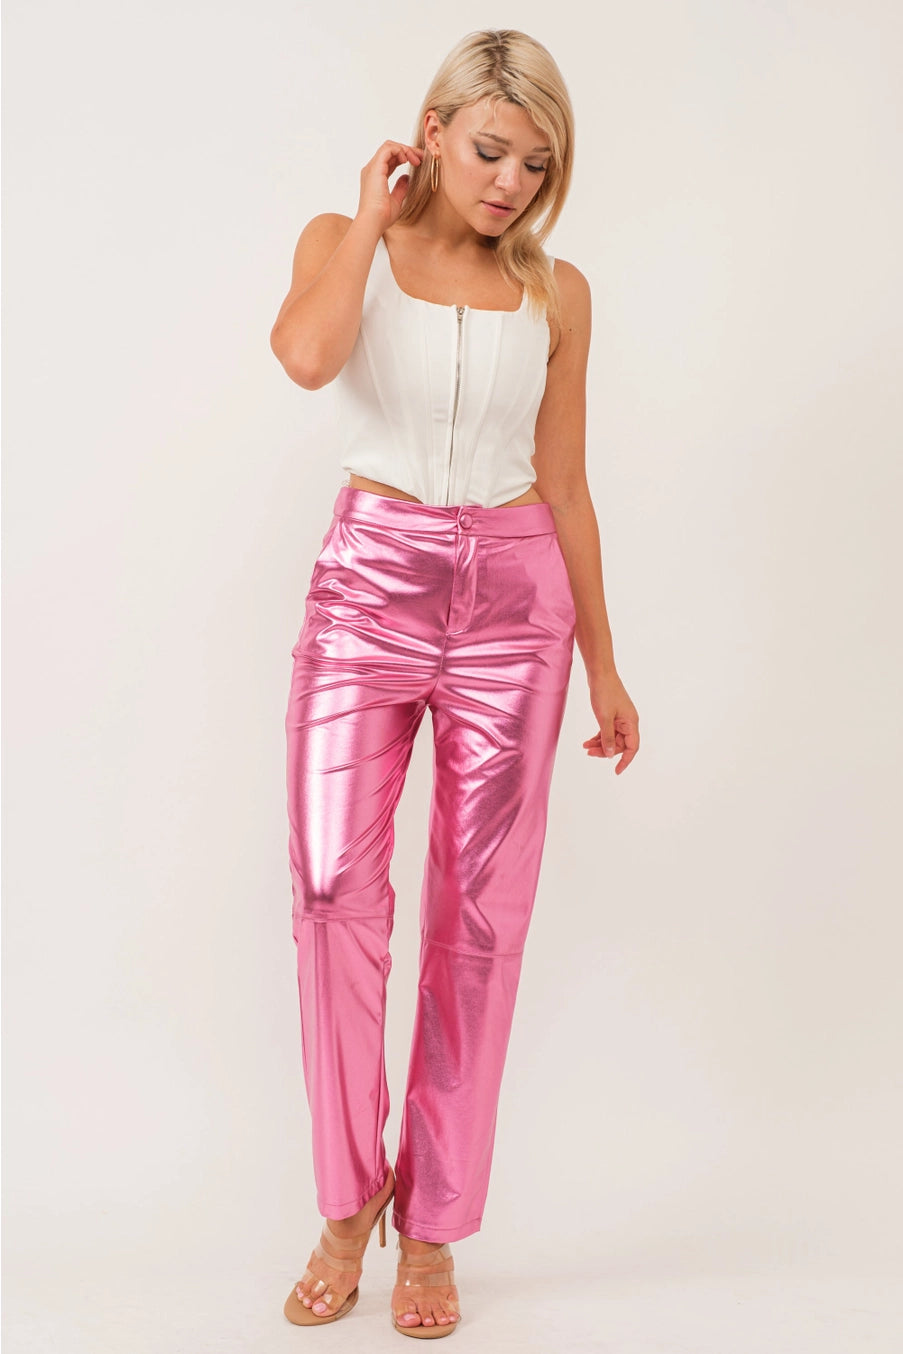 The silver trousers trend will help you shine this season | IMAGE.ie